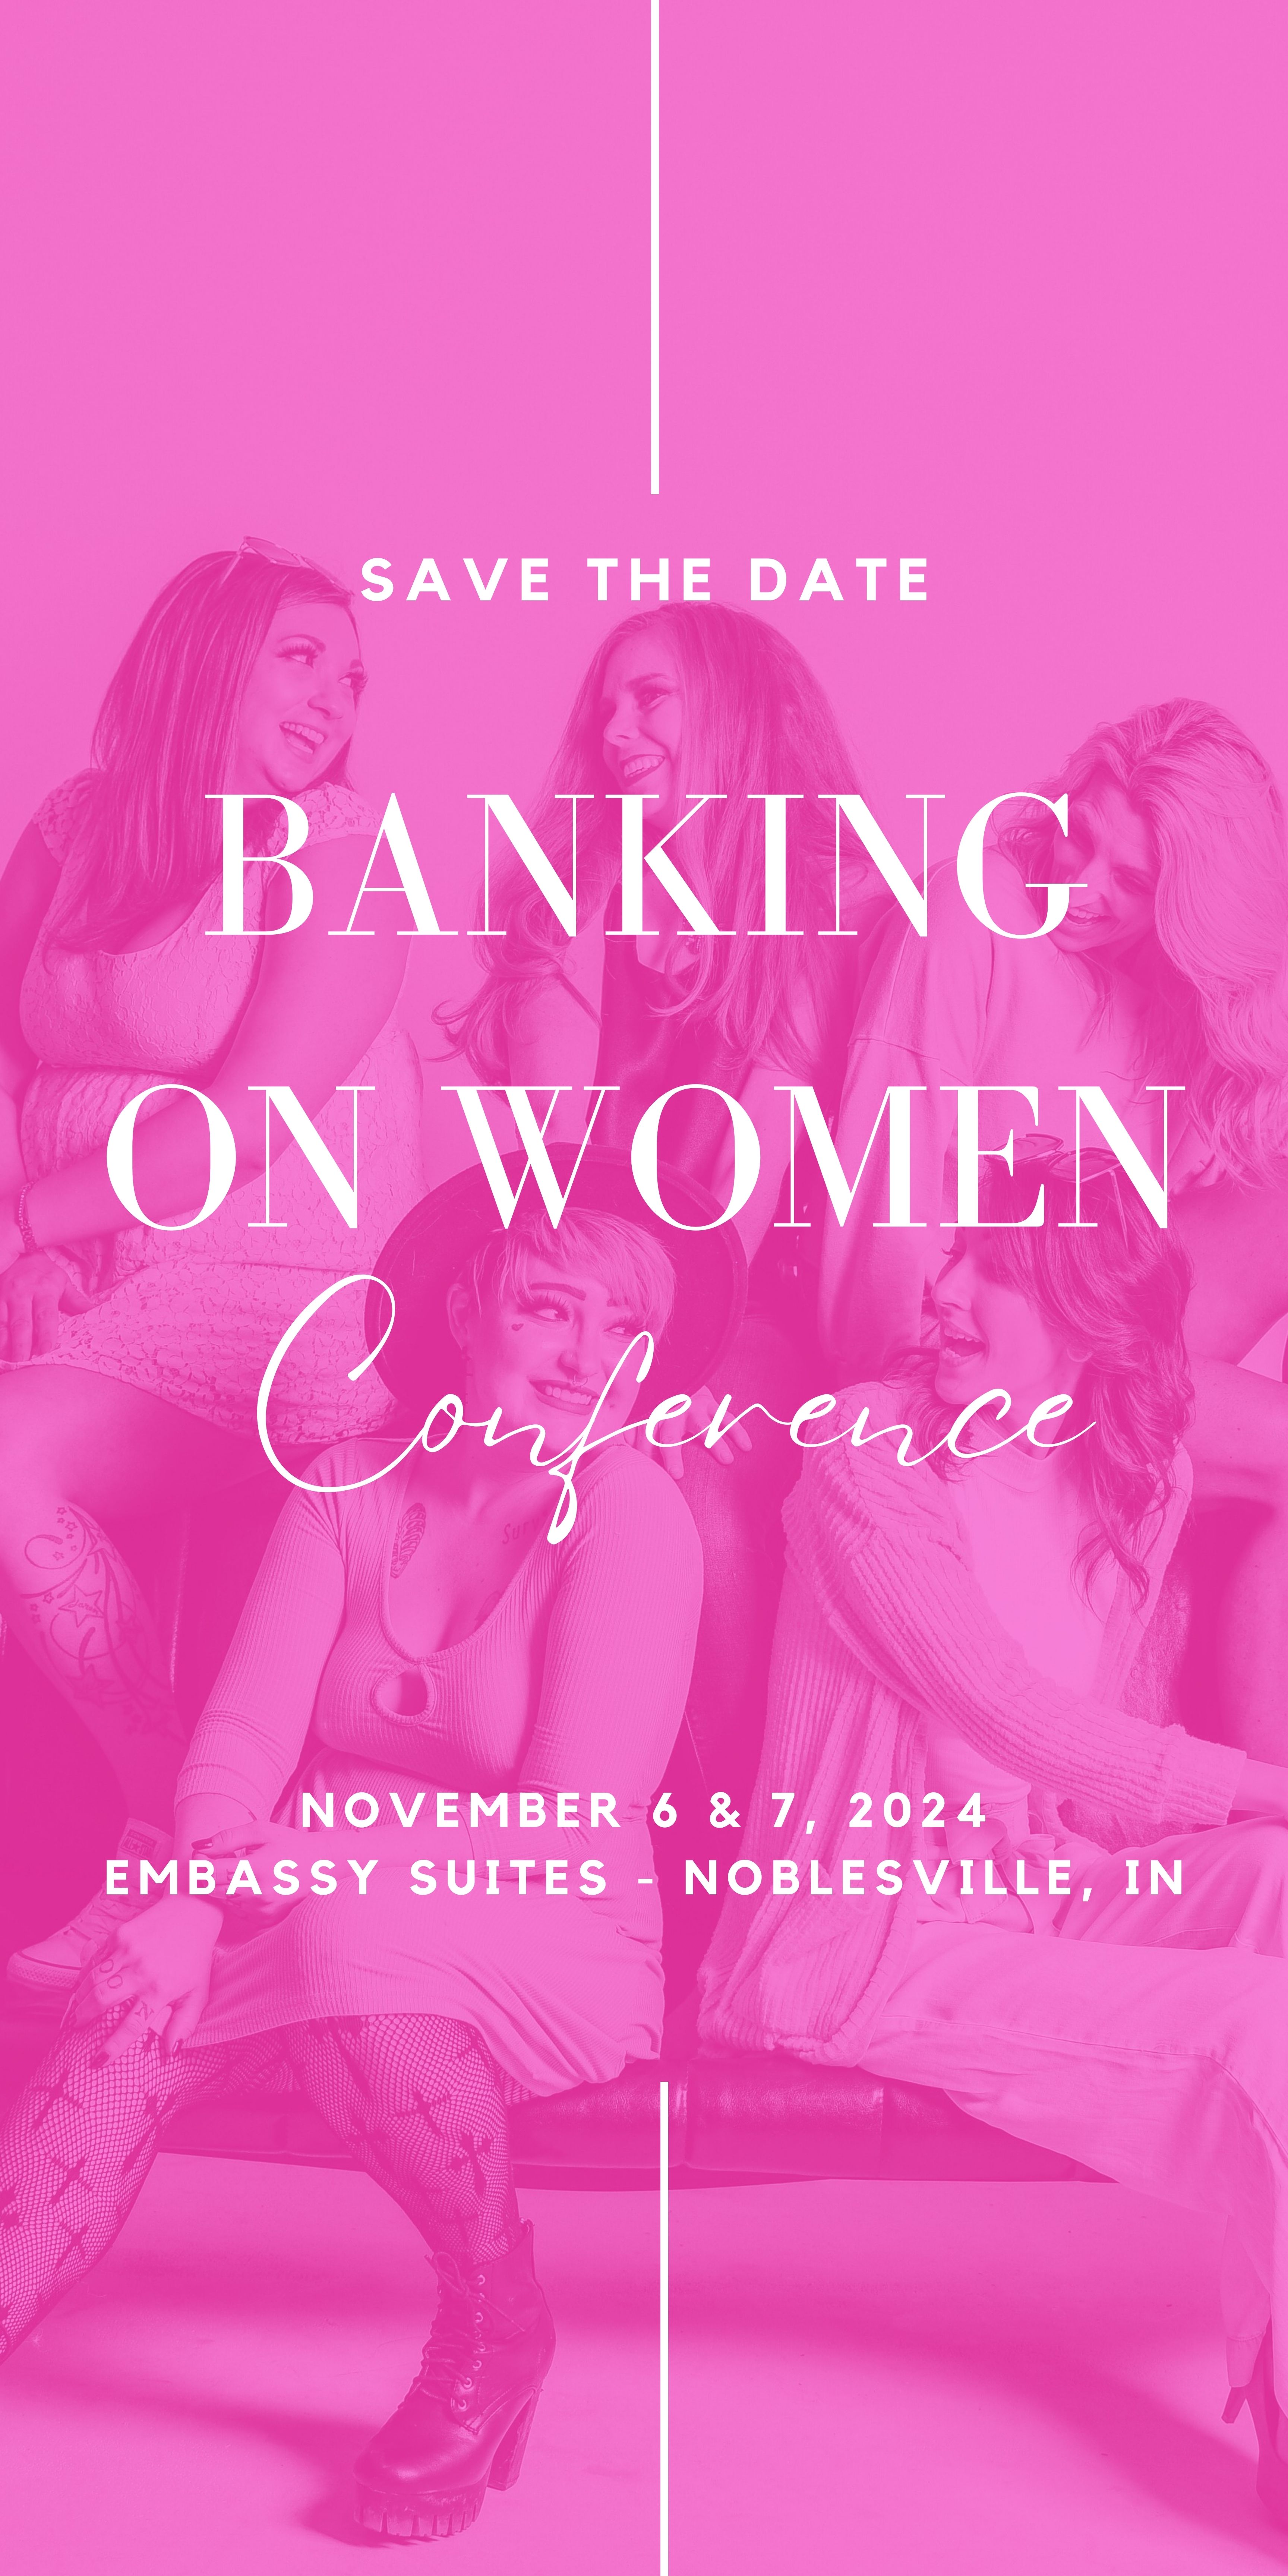 Banking on Women Conference